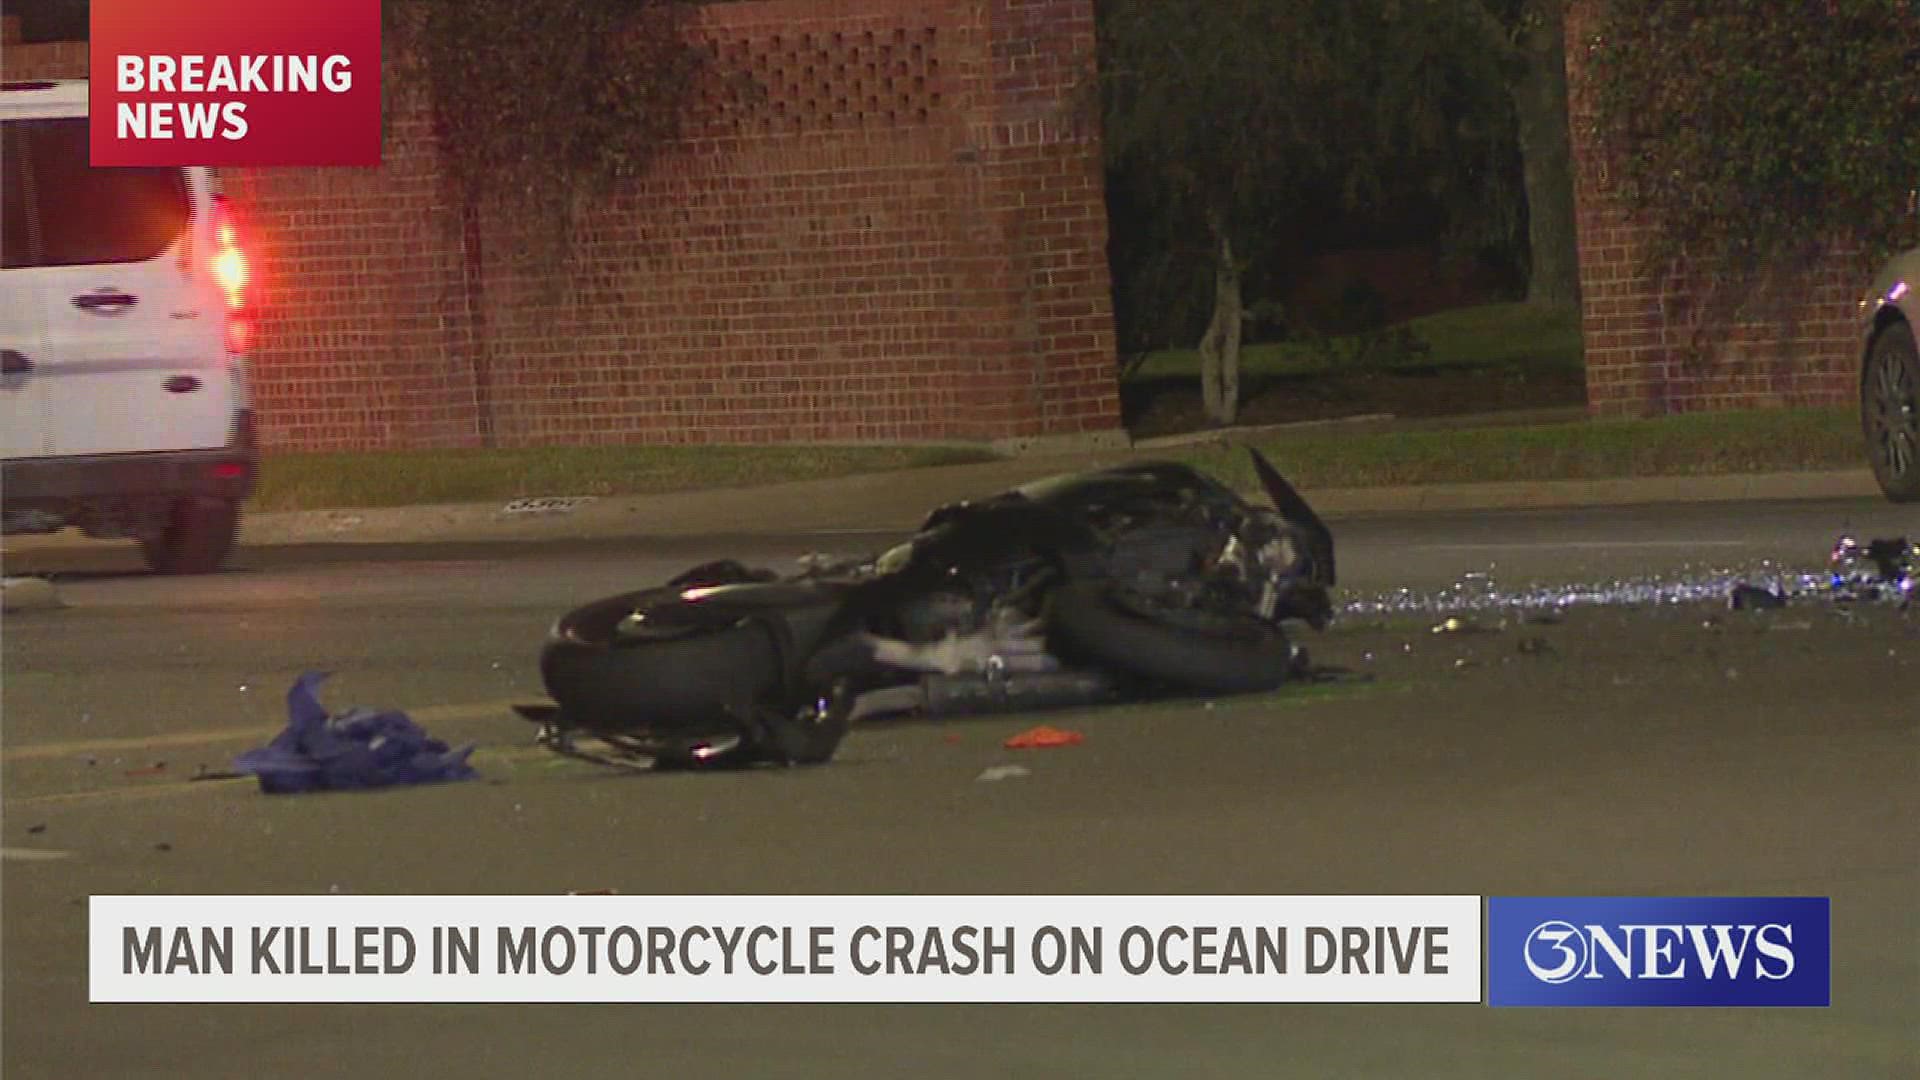 3NEWS has crews on scene who said the incident took place around 8 p.m. when a vehicle hit a motorcyclist.